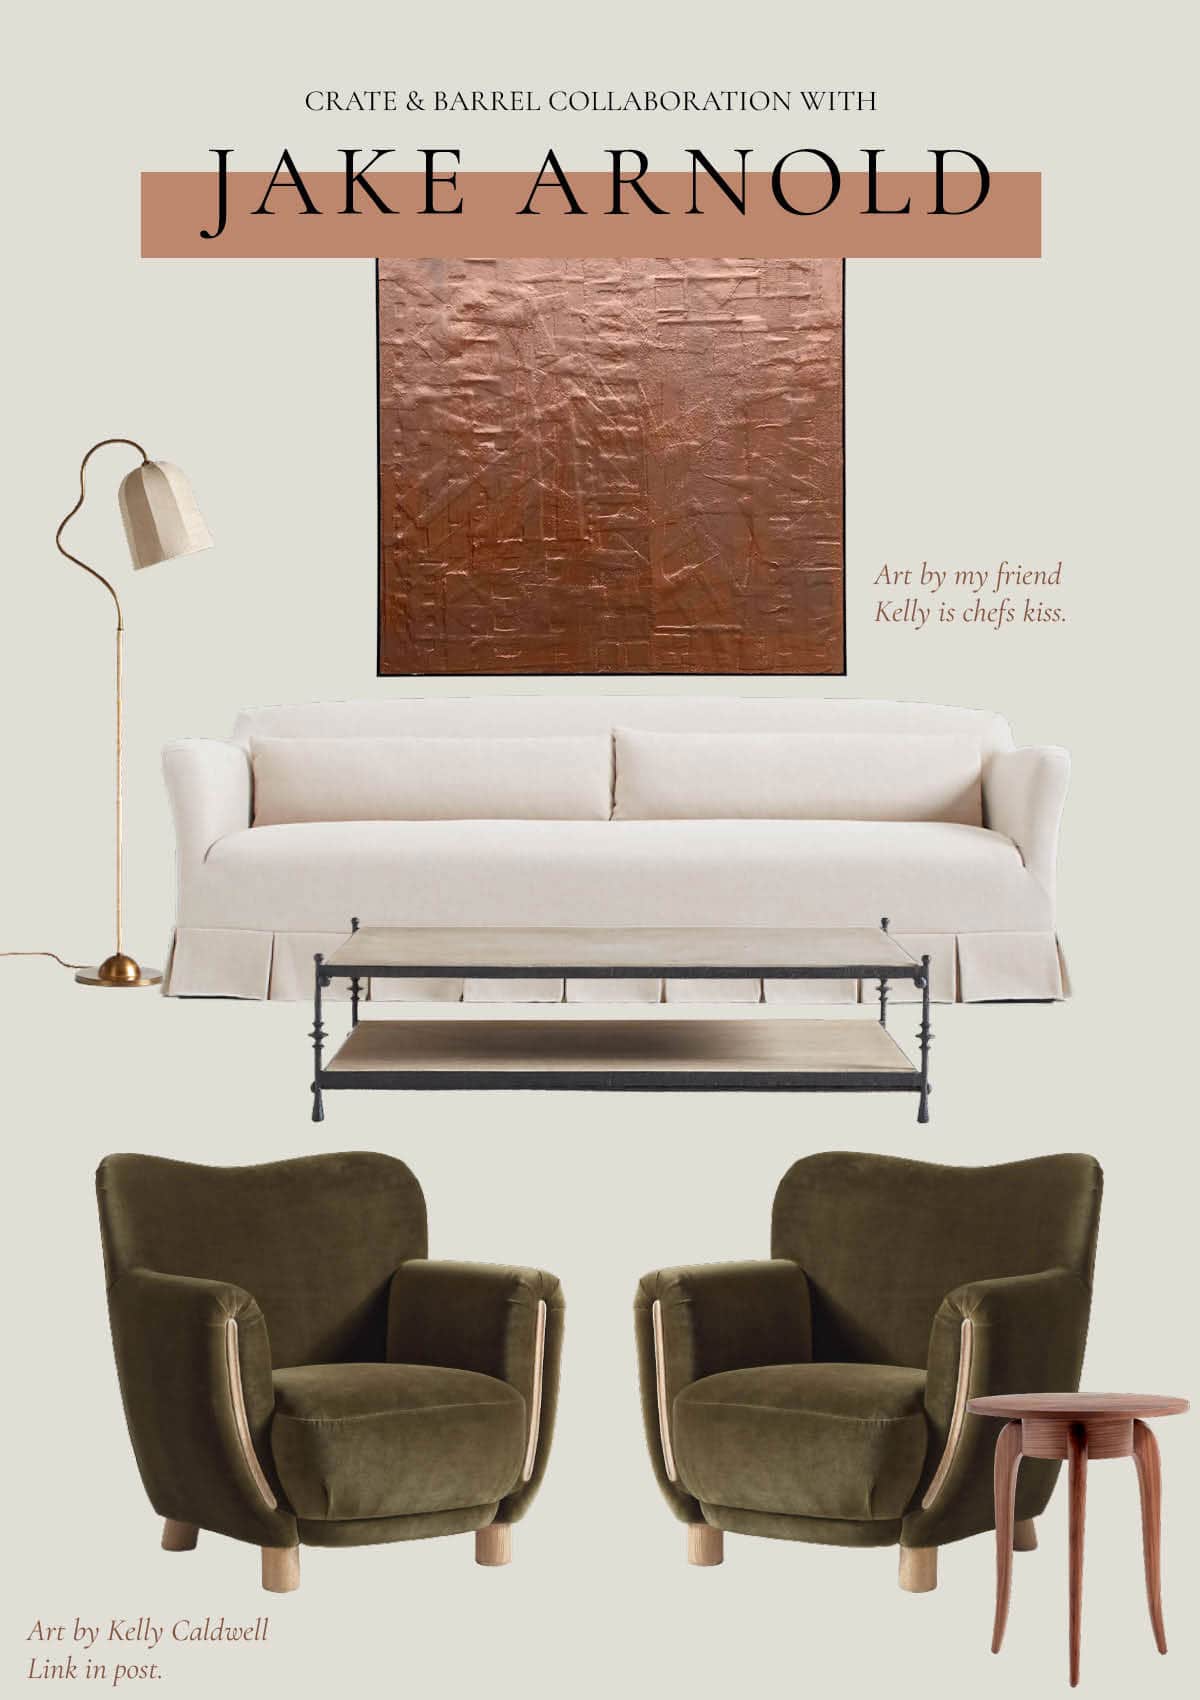 Gorgeous modern eclectic living room design mood board using the new Crate & Barrel collaboration with Jack Arnold.